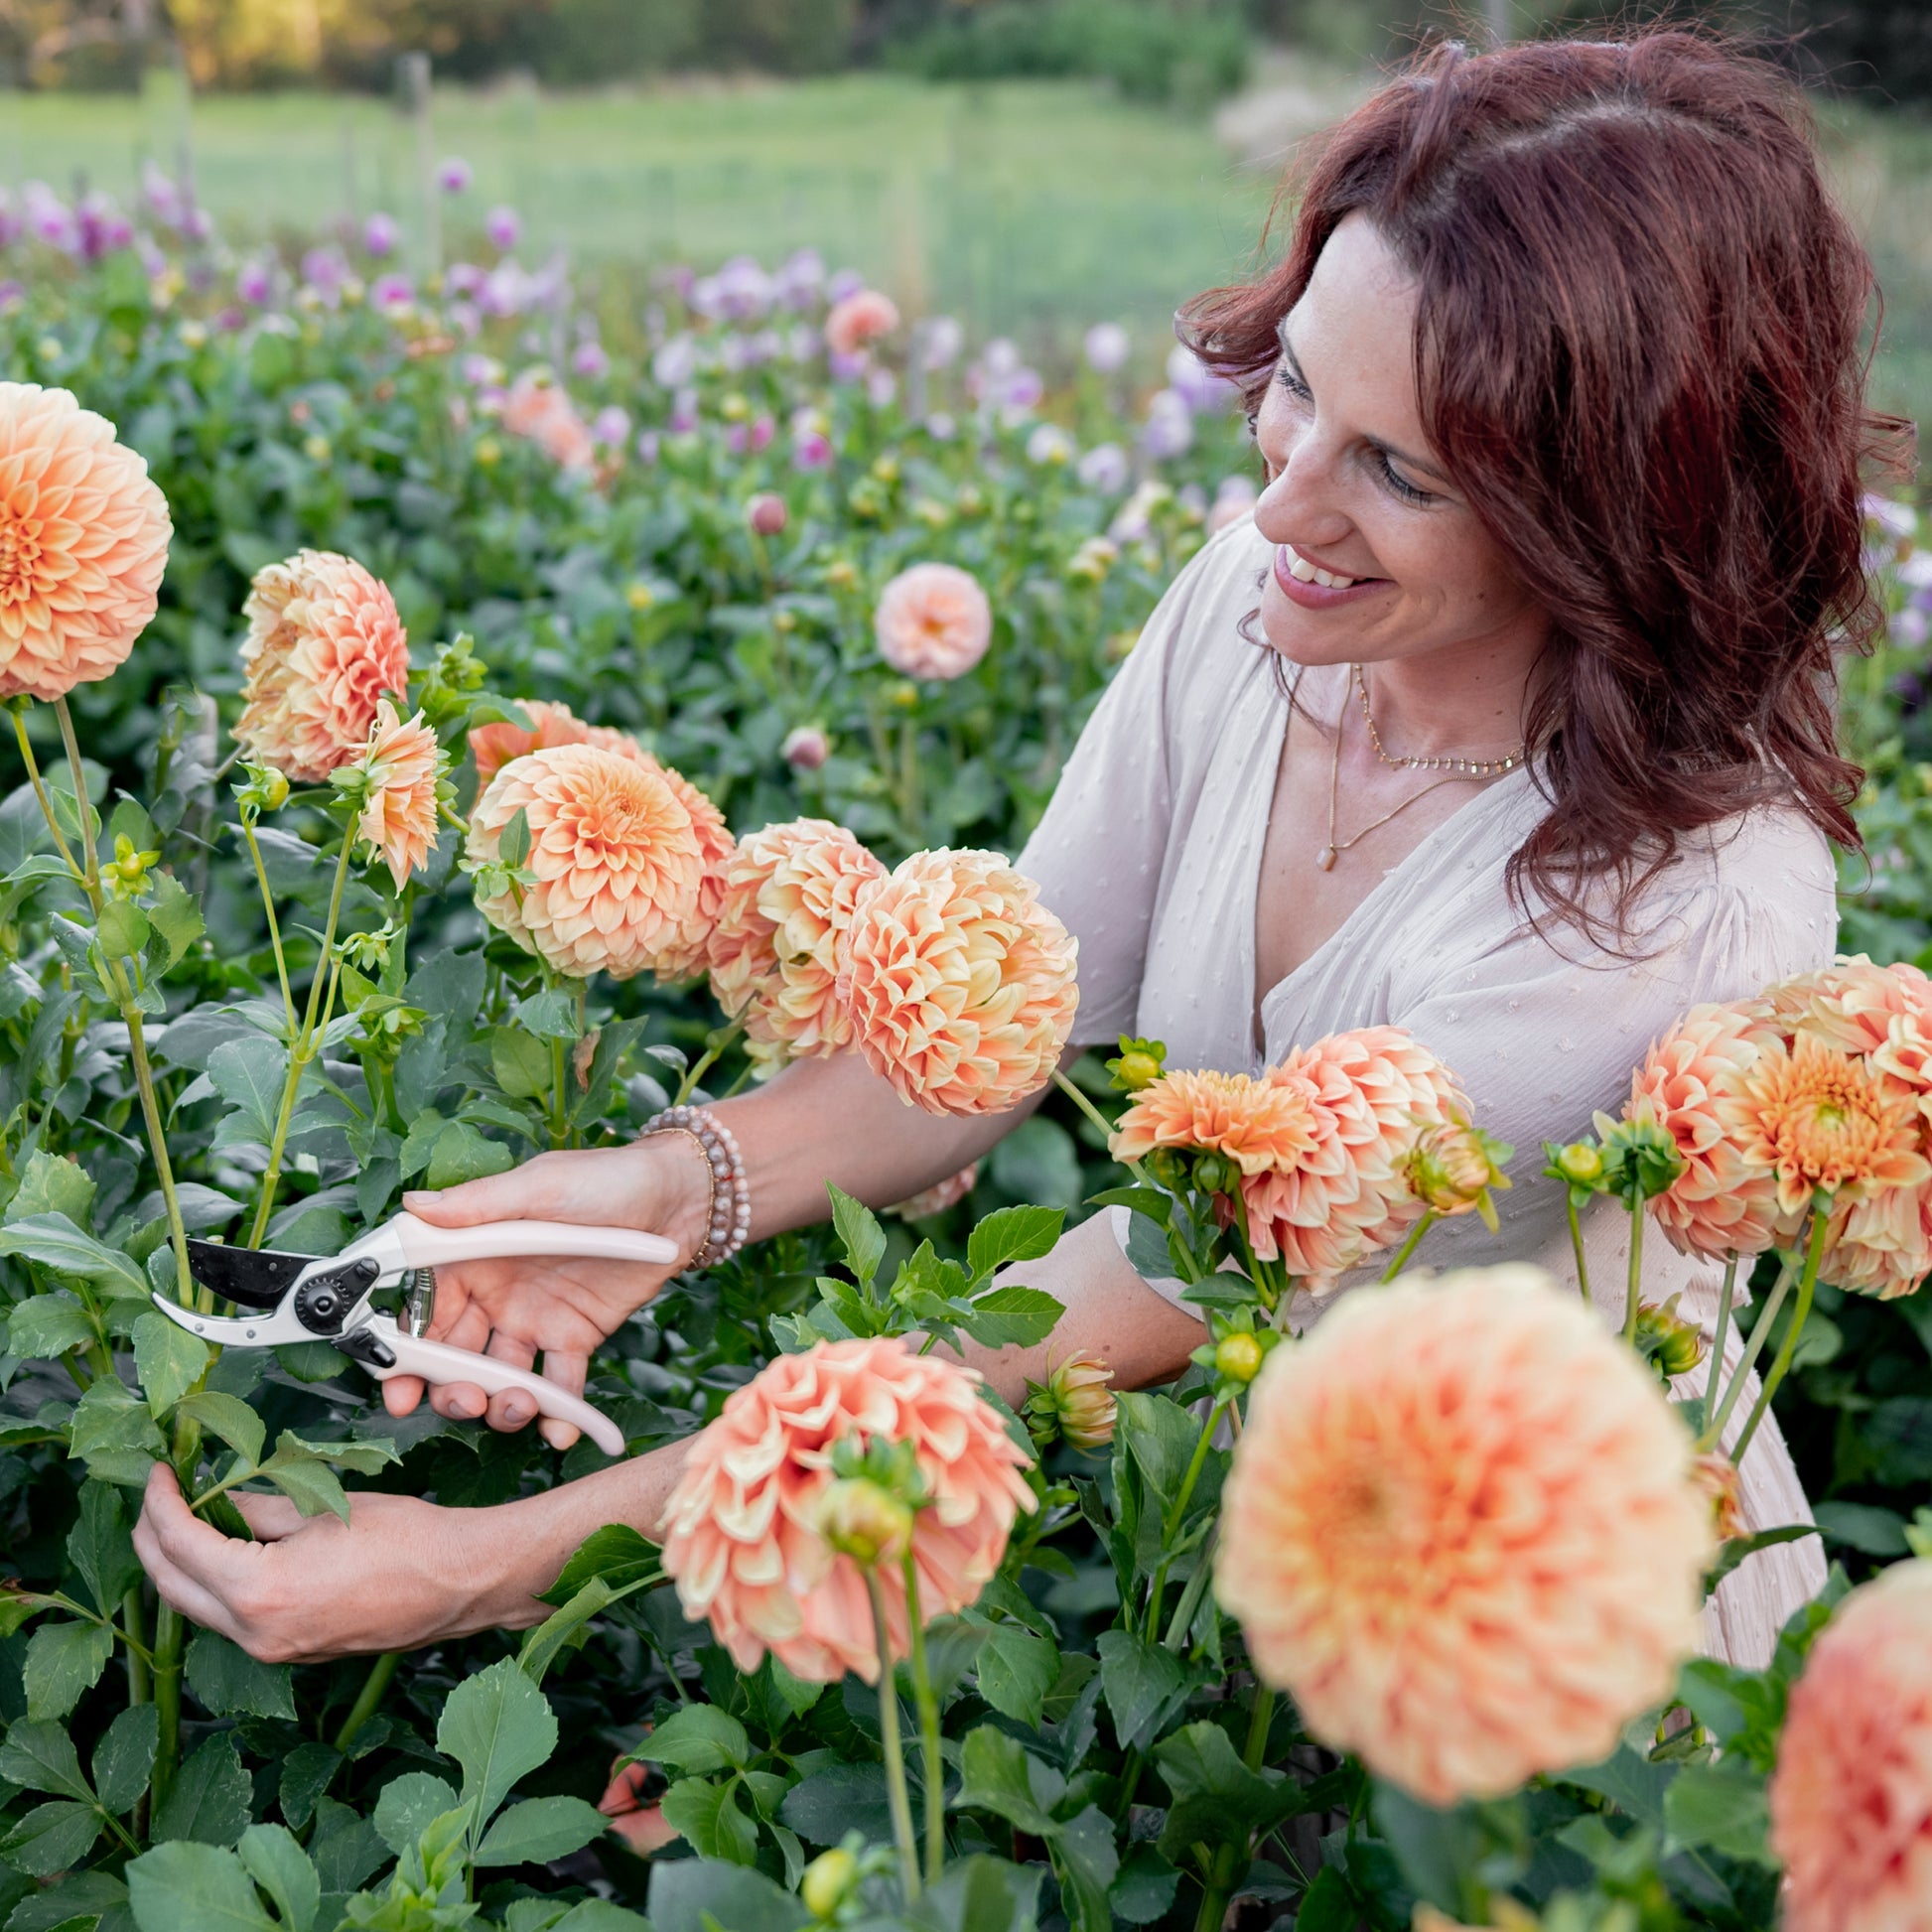 woman cutting flowers with peach secateurs